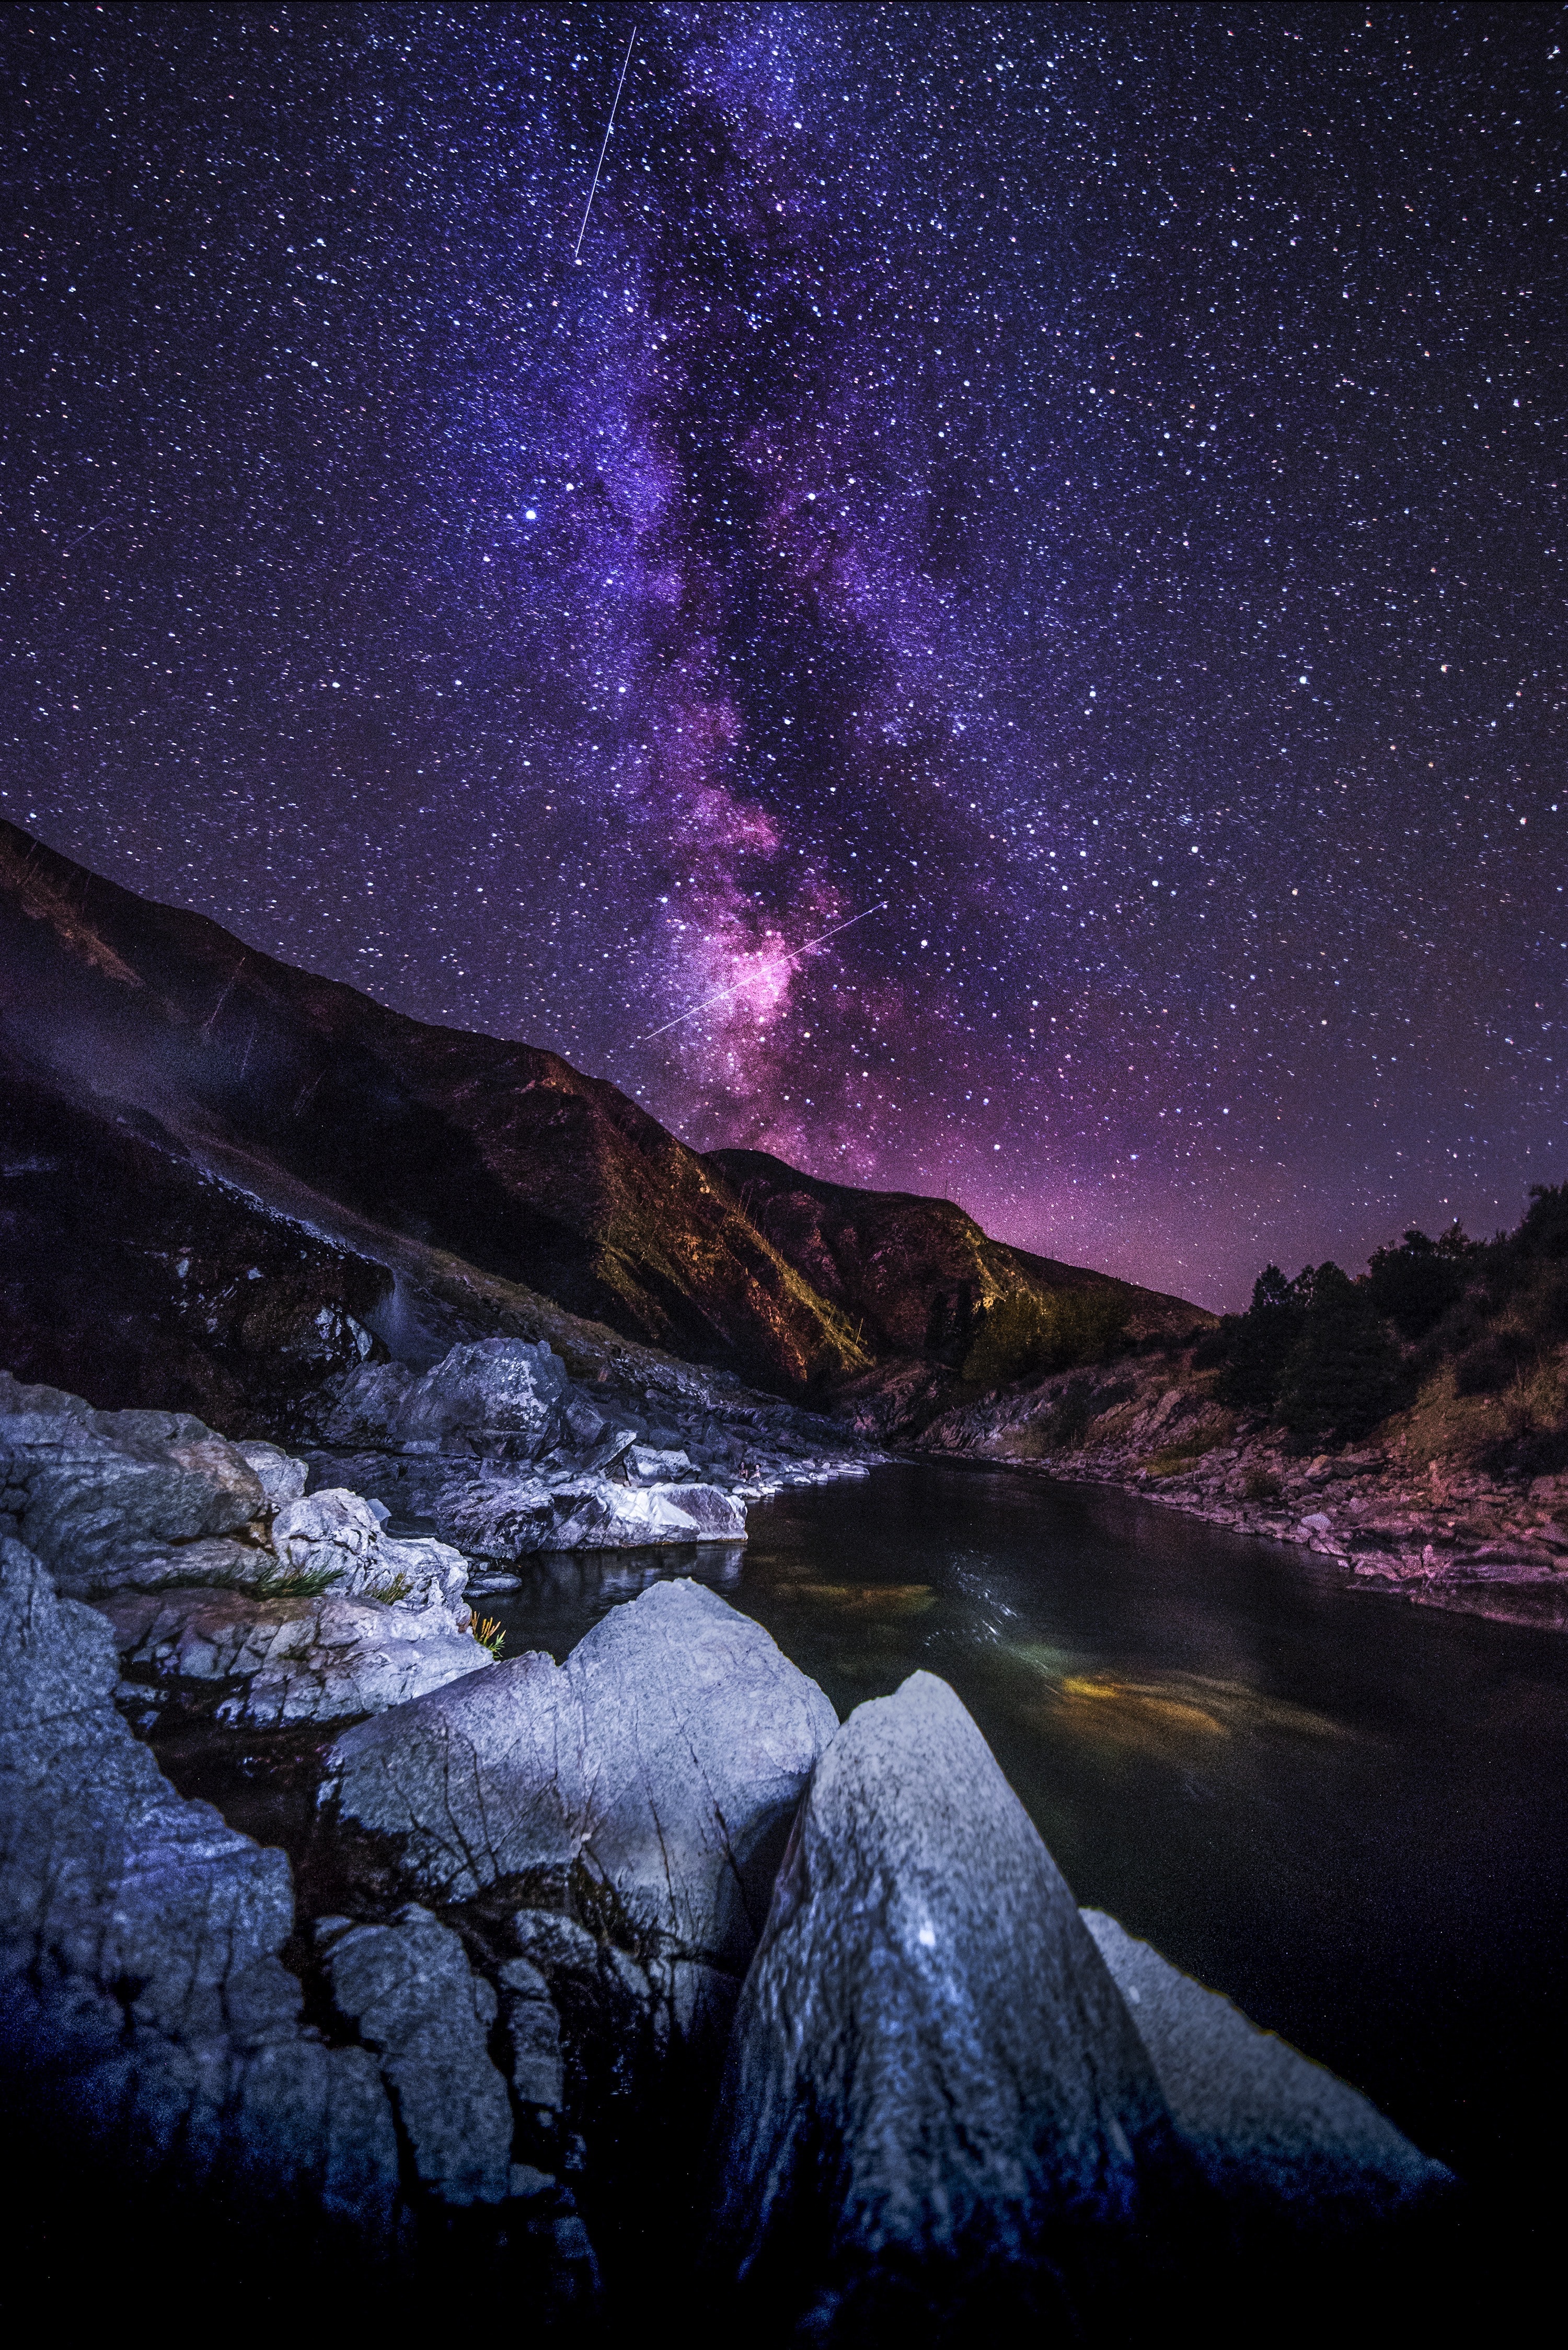 rivers, starry sky, nature, landscape, mountains, night cellphone